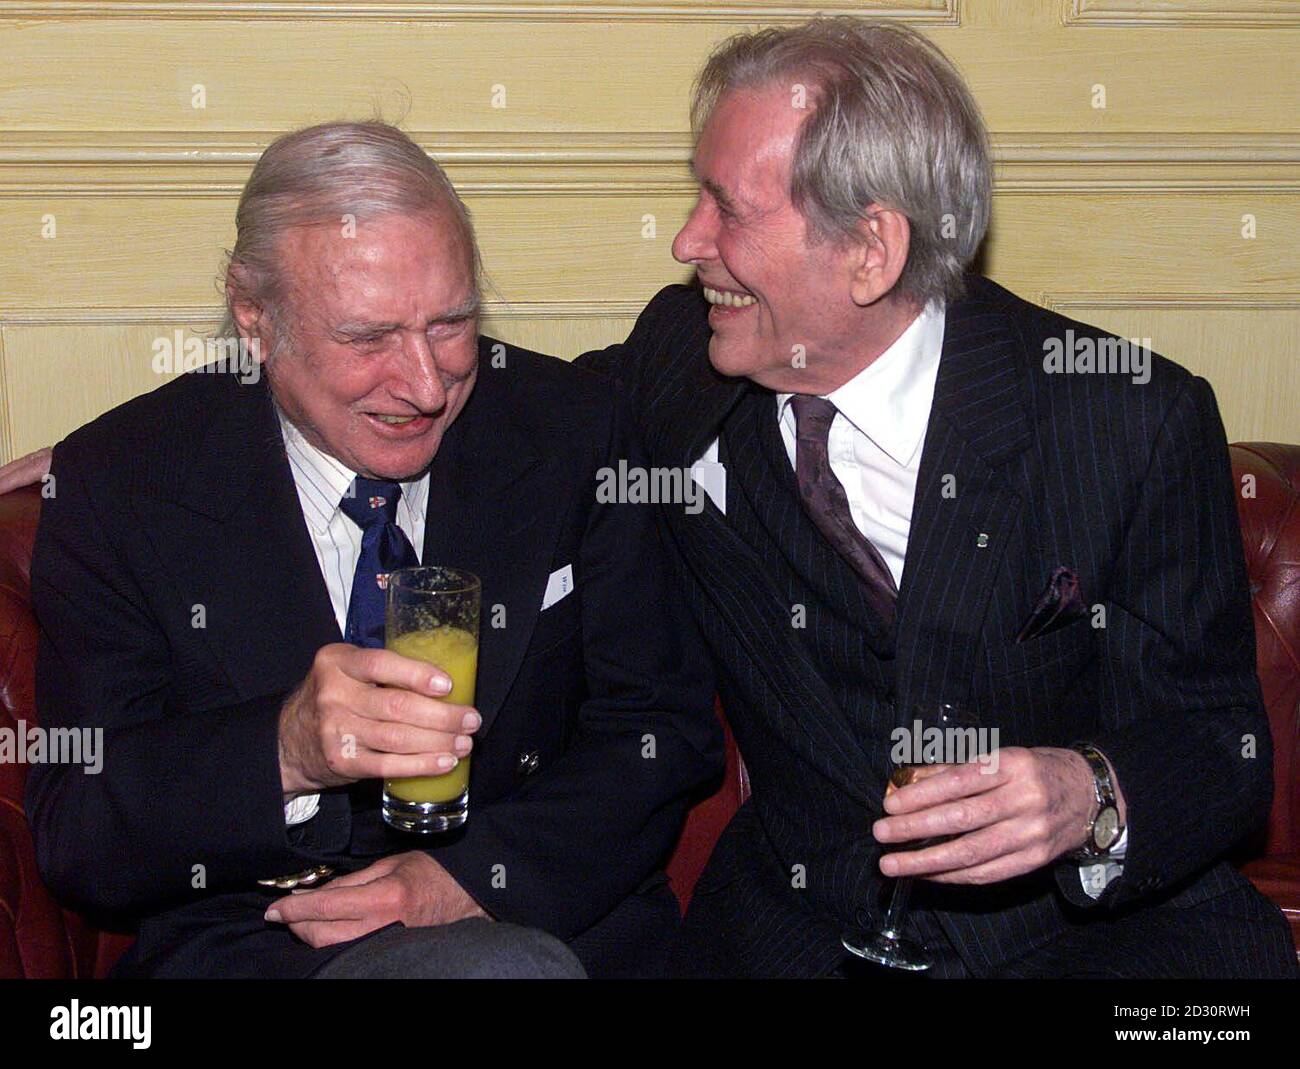 Veteran actor Peter O'Toole (right) with comedian Spike Milligan during a ceremony at London's Simpson's-in-the-Strand, where he received the Oldie of the Year Award. Mr O'Toole was chosen by a panel of judges,  for his razor-sharp wit and zest for life  *The panel of judges included Joanna Lumley, Richard Ingrams and Terry Wogan. Previous winners include Spike Milligan, Betty Boothroyd and One Foot In The Grave star Richard Wilson. Stock Photo